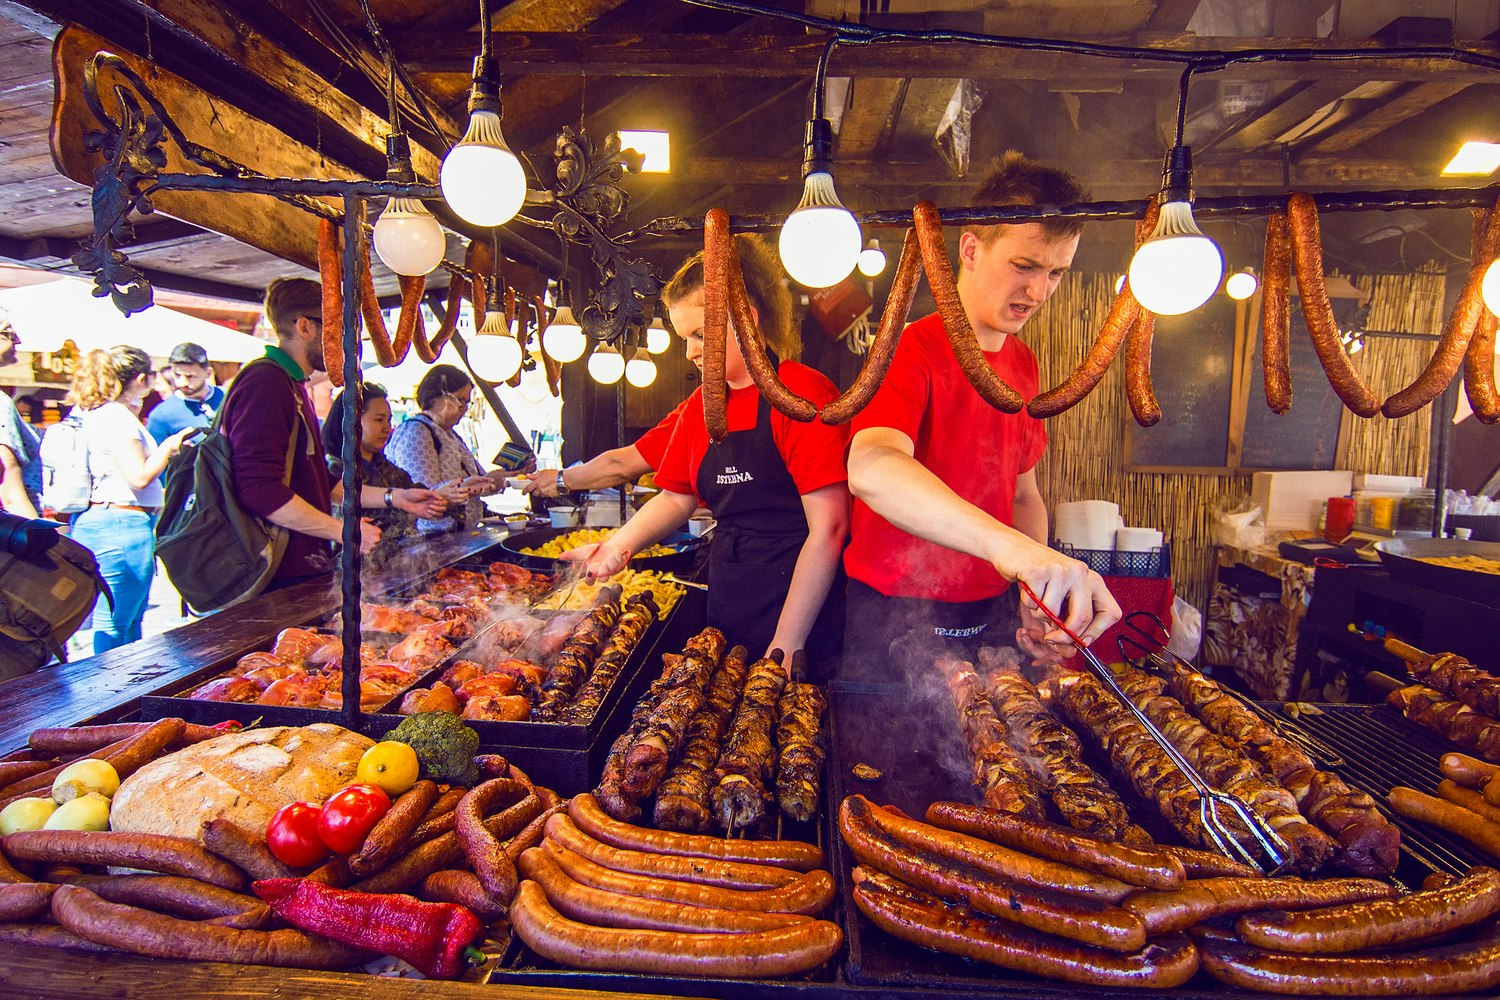 Two people cook sausages at a street-food stall in Krakow